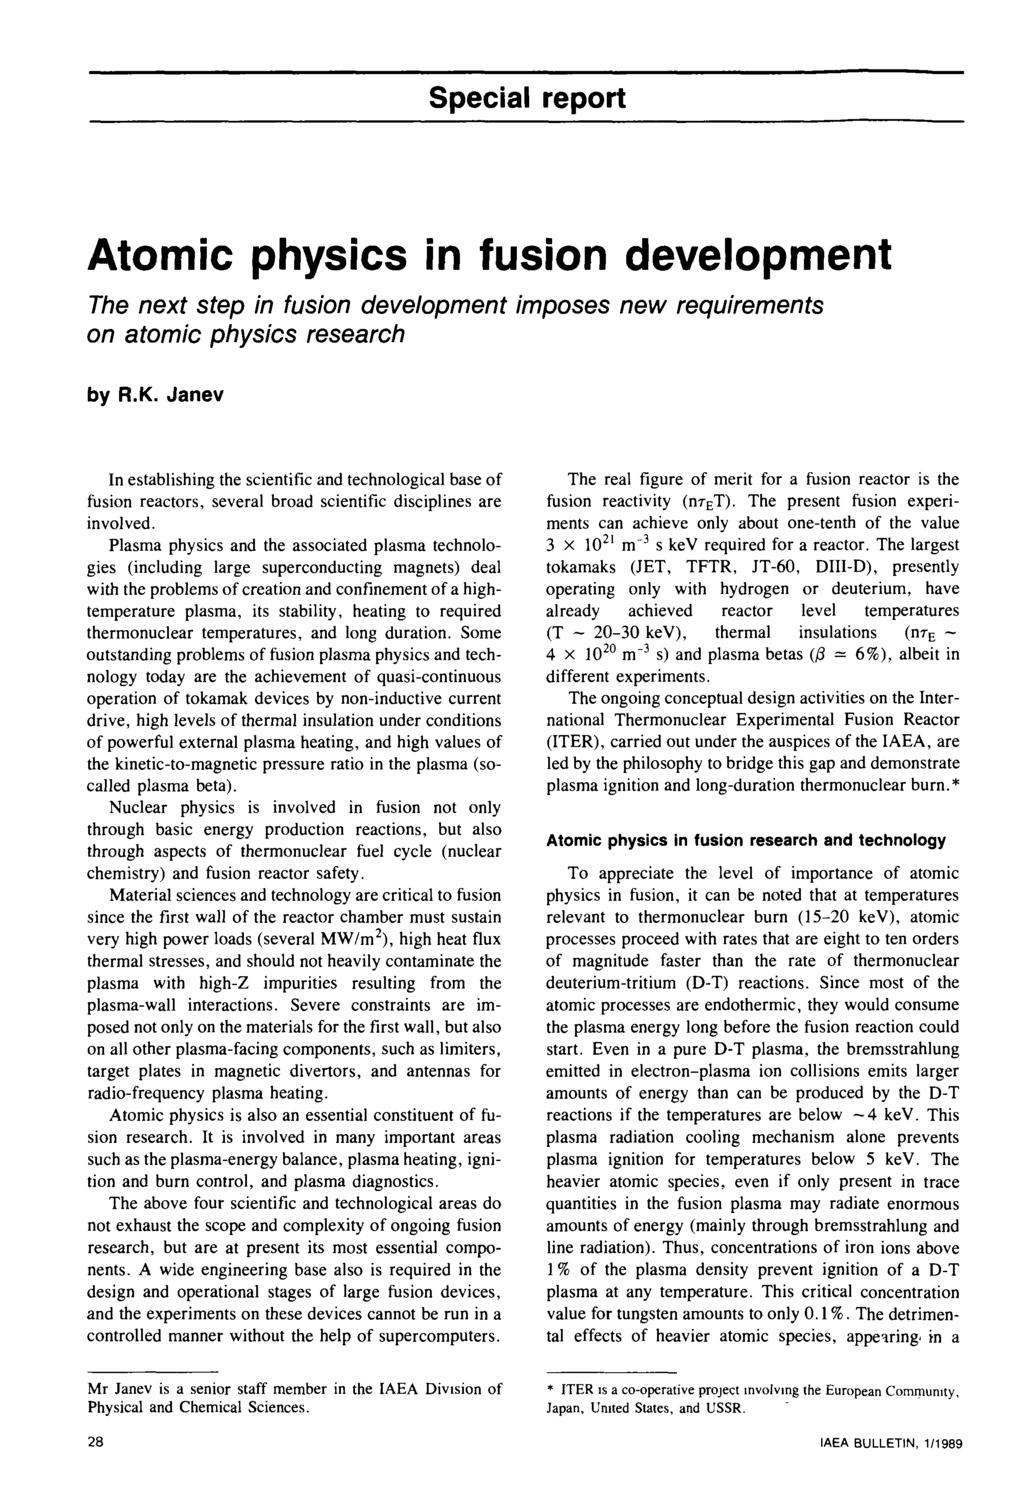 Atomic physics in fusion development The next step in fusion development imposes new requirements on atomic physics research by R.K.